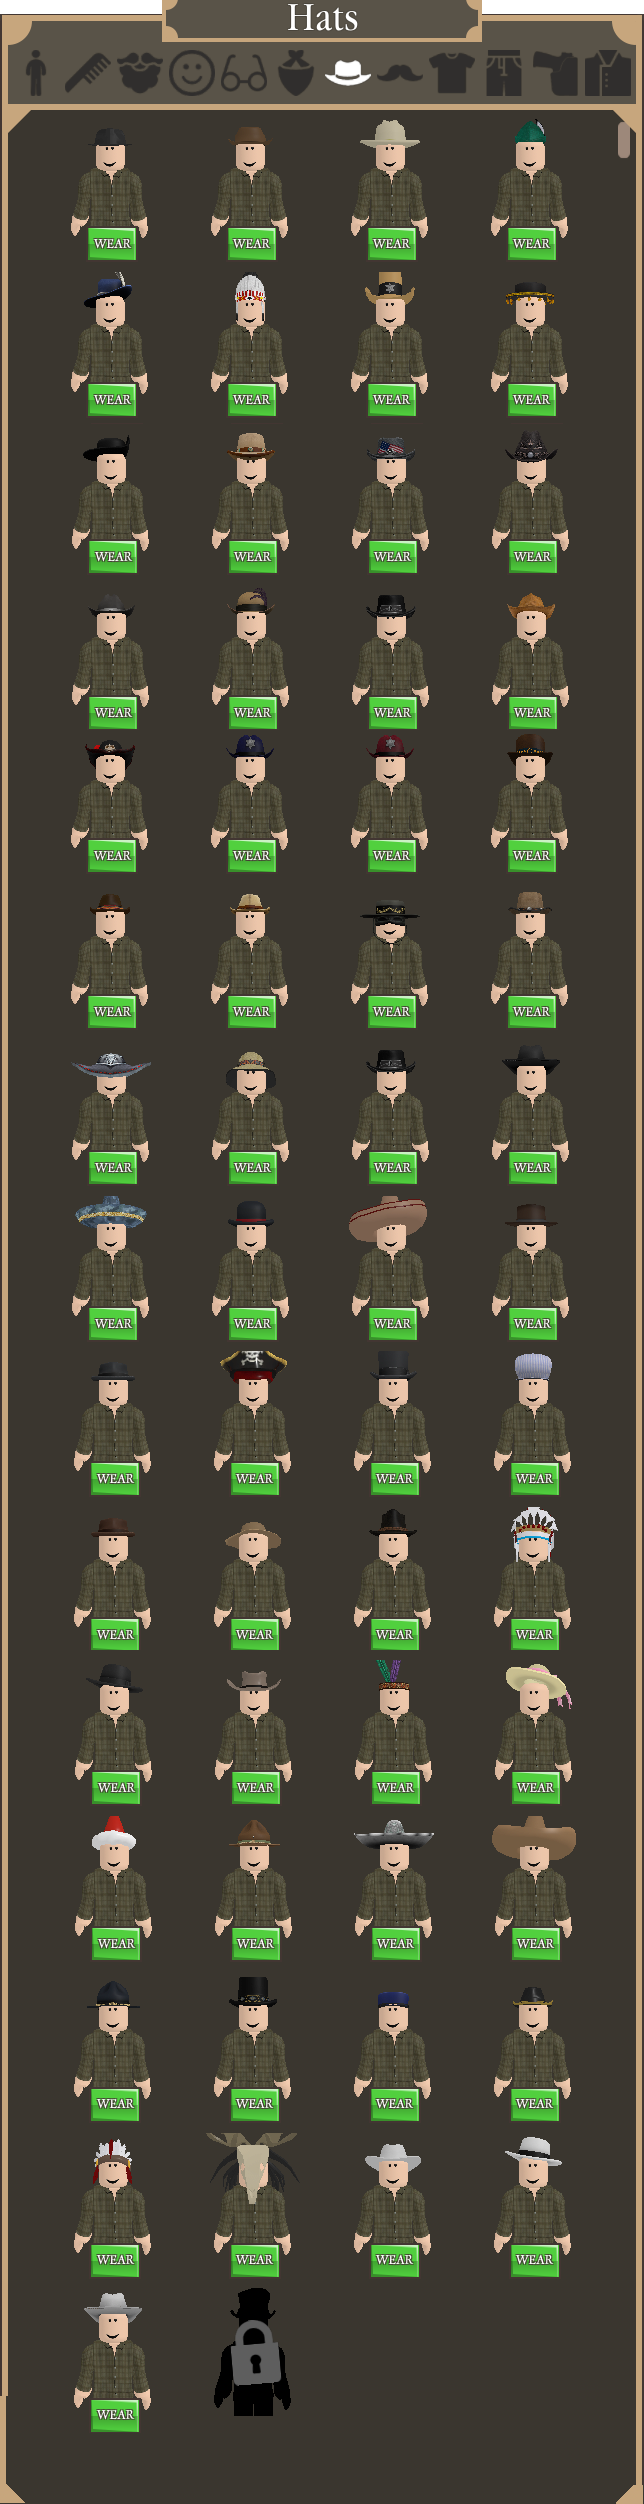 Cosmetics The Wild West Wiki Fandom - how to wear ten or more hats on roblox